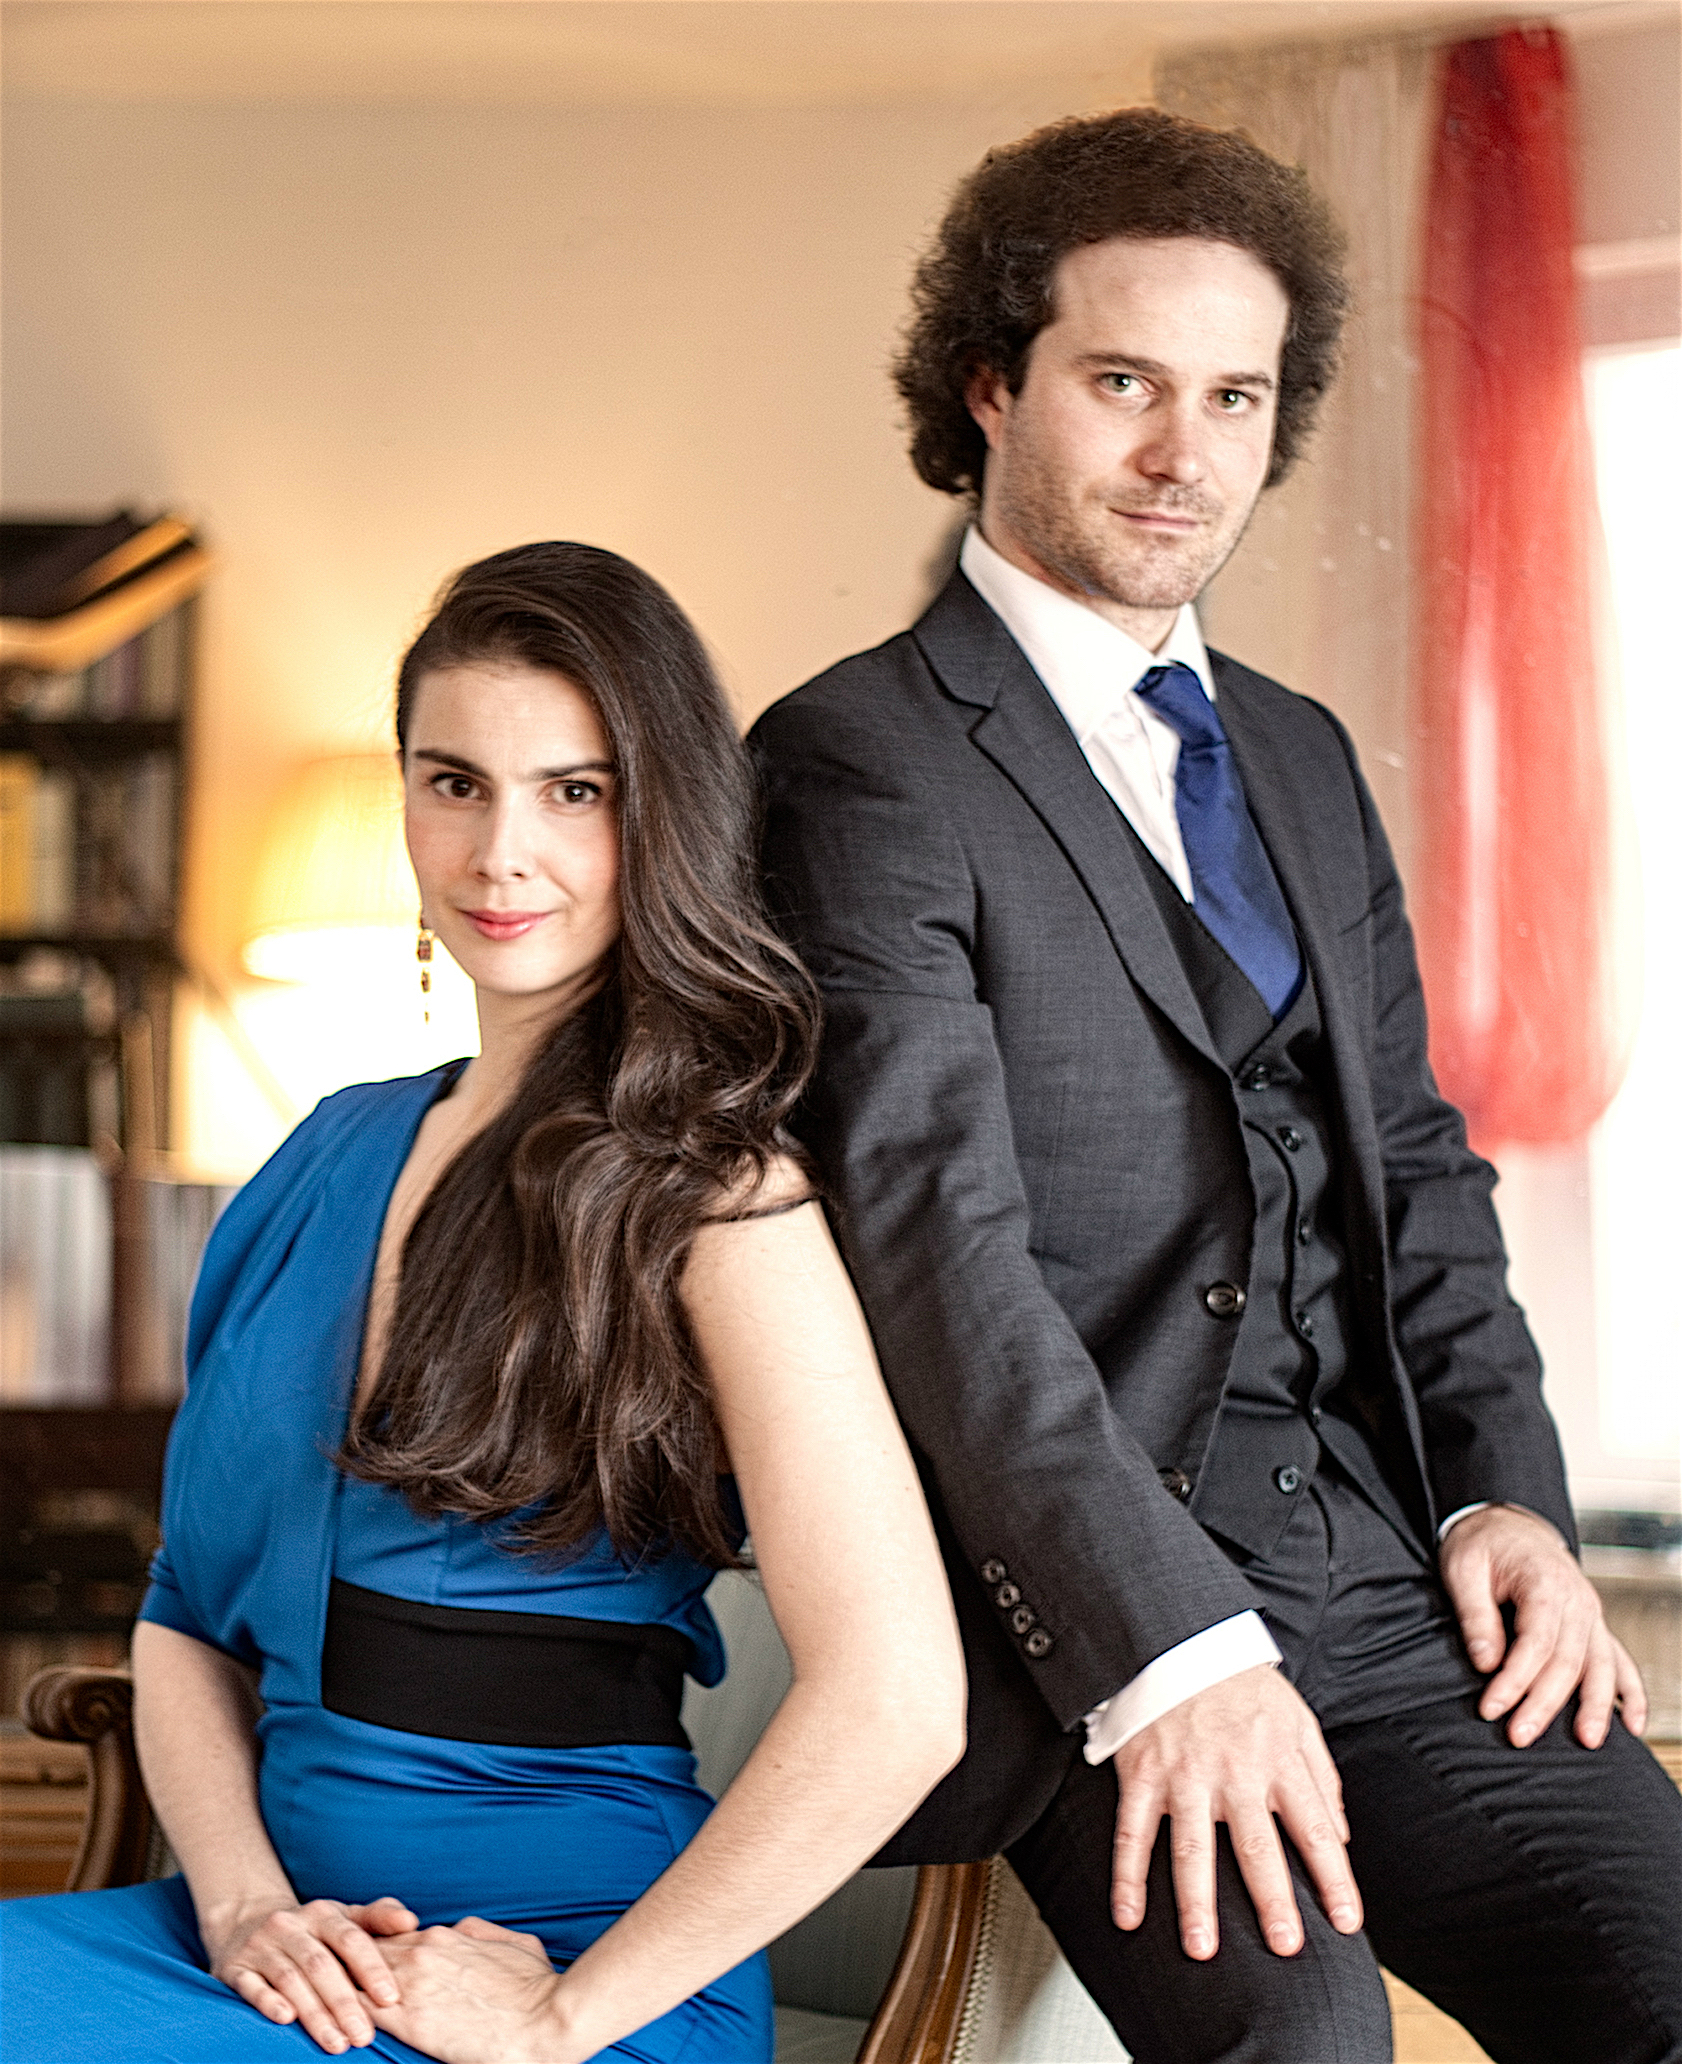 French Soprano and South African/Israeli Pianist to Perform at JBU Nov. 20